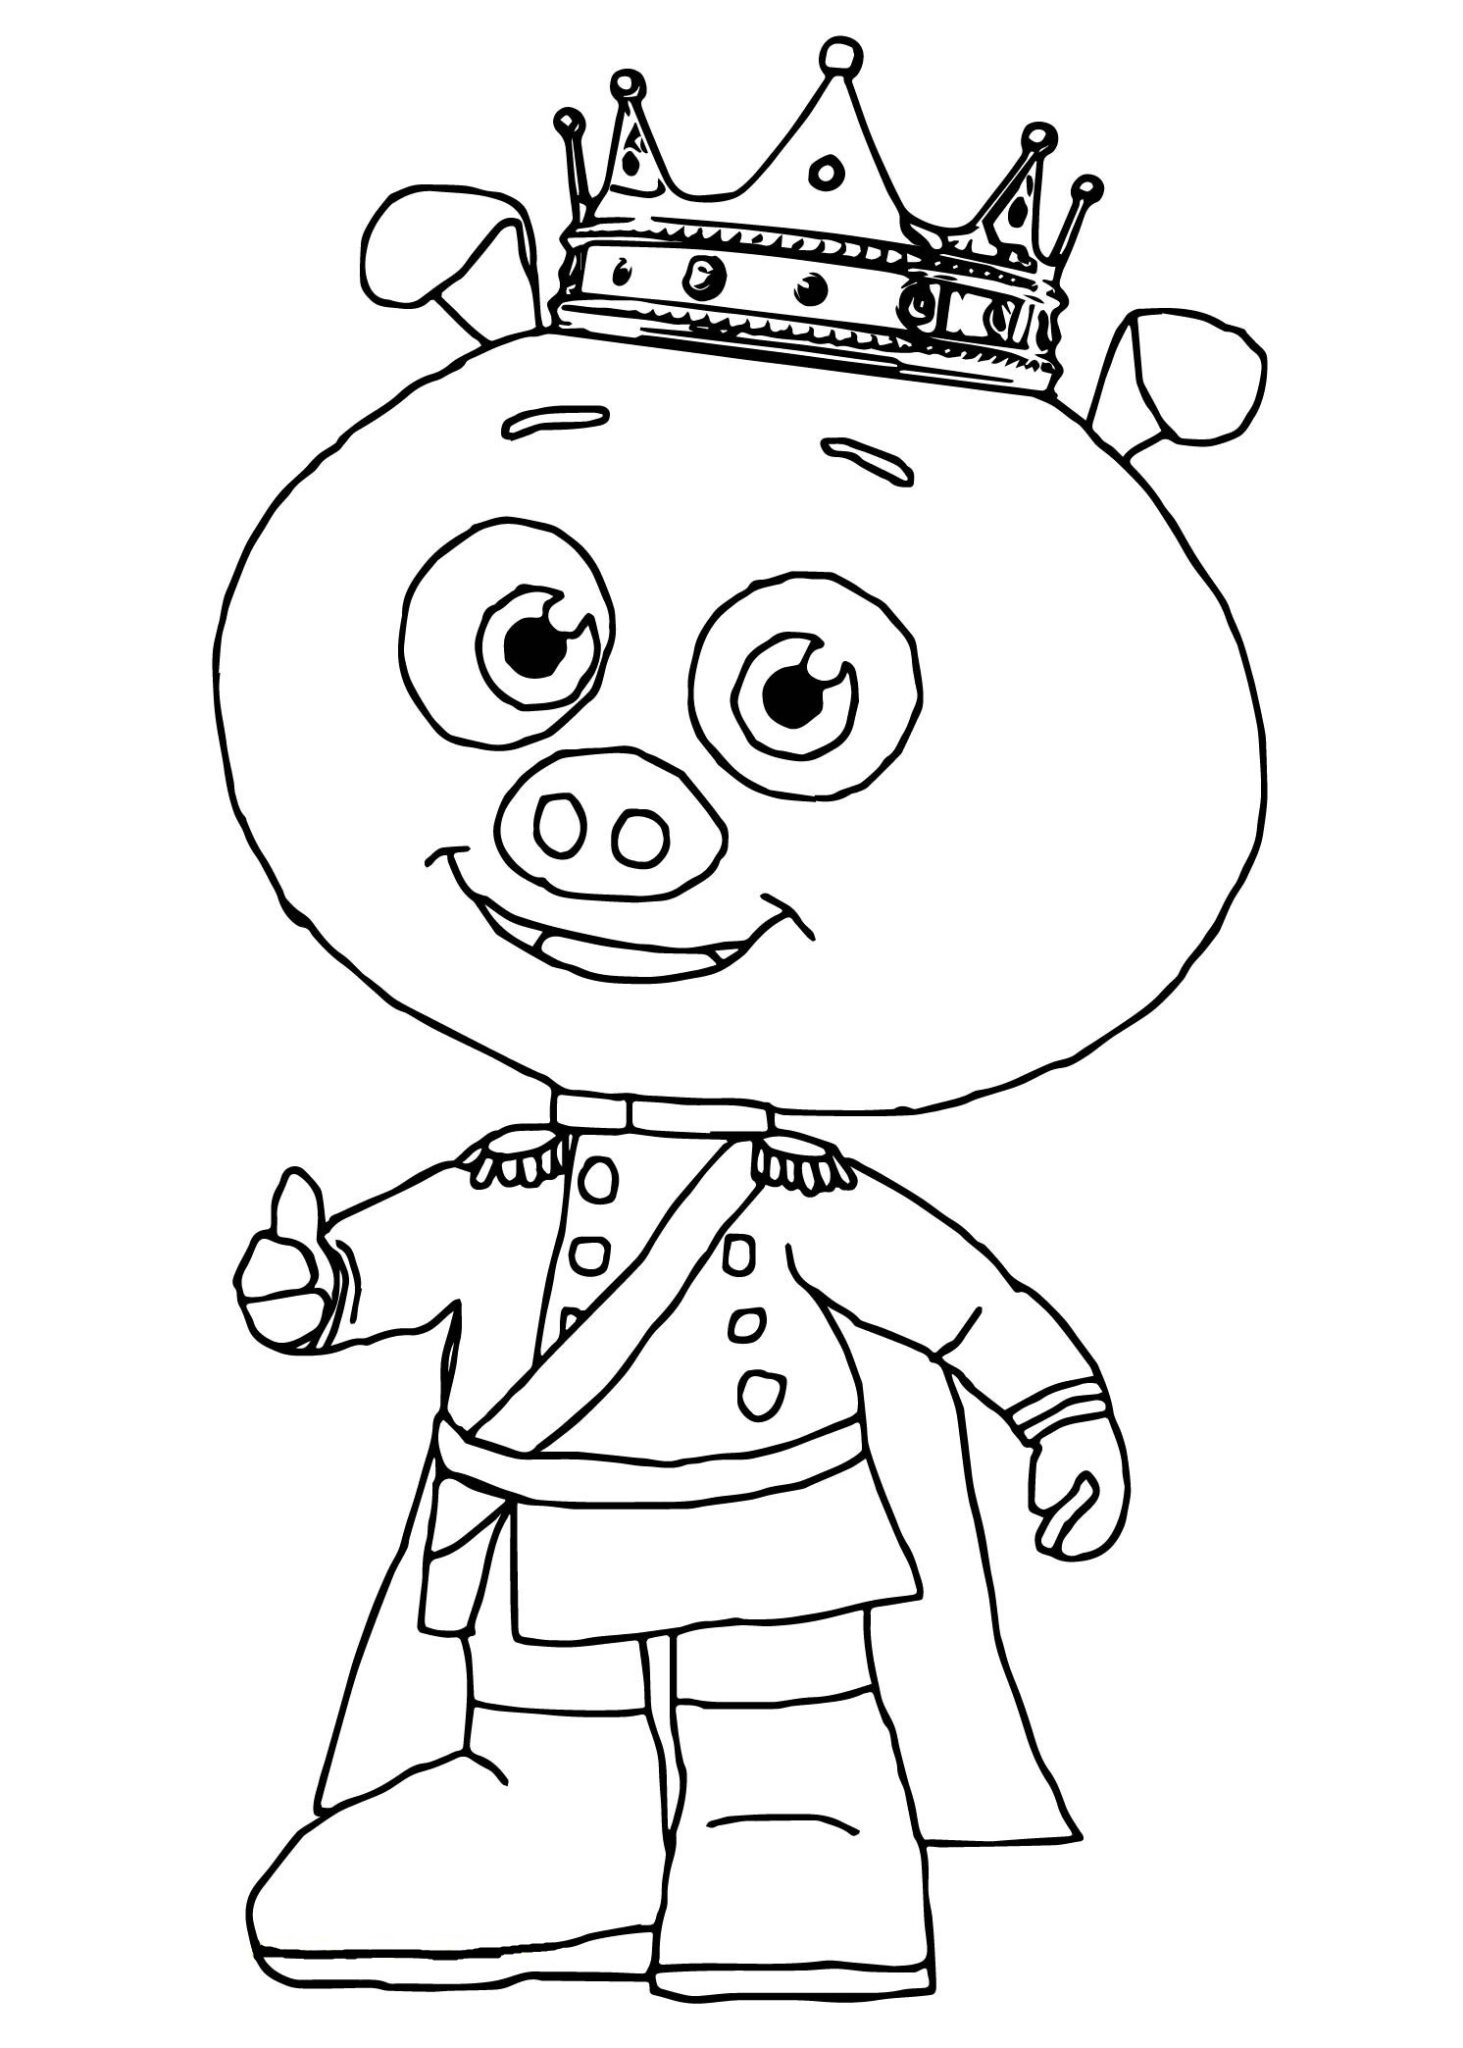 Super Why Coloring Pages Pdf For Children - Coloringfolder.com